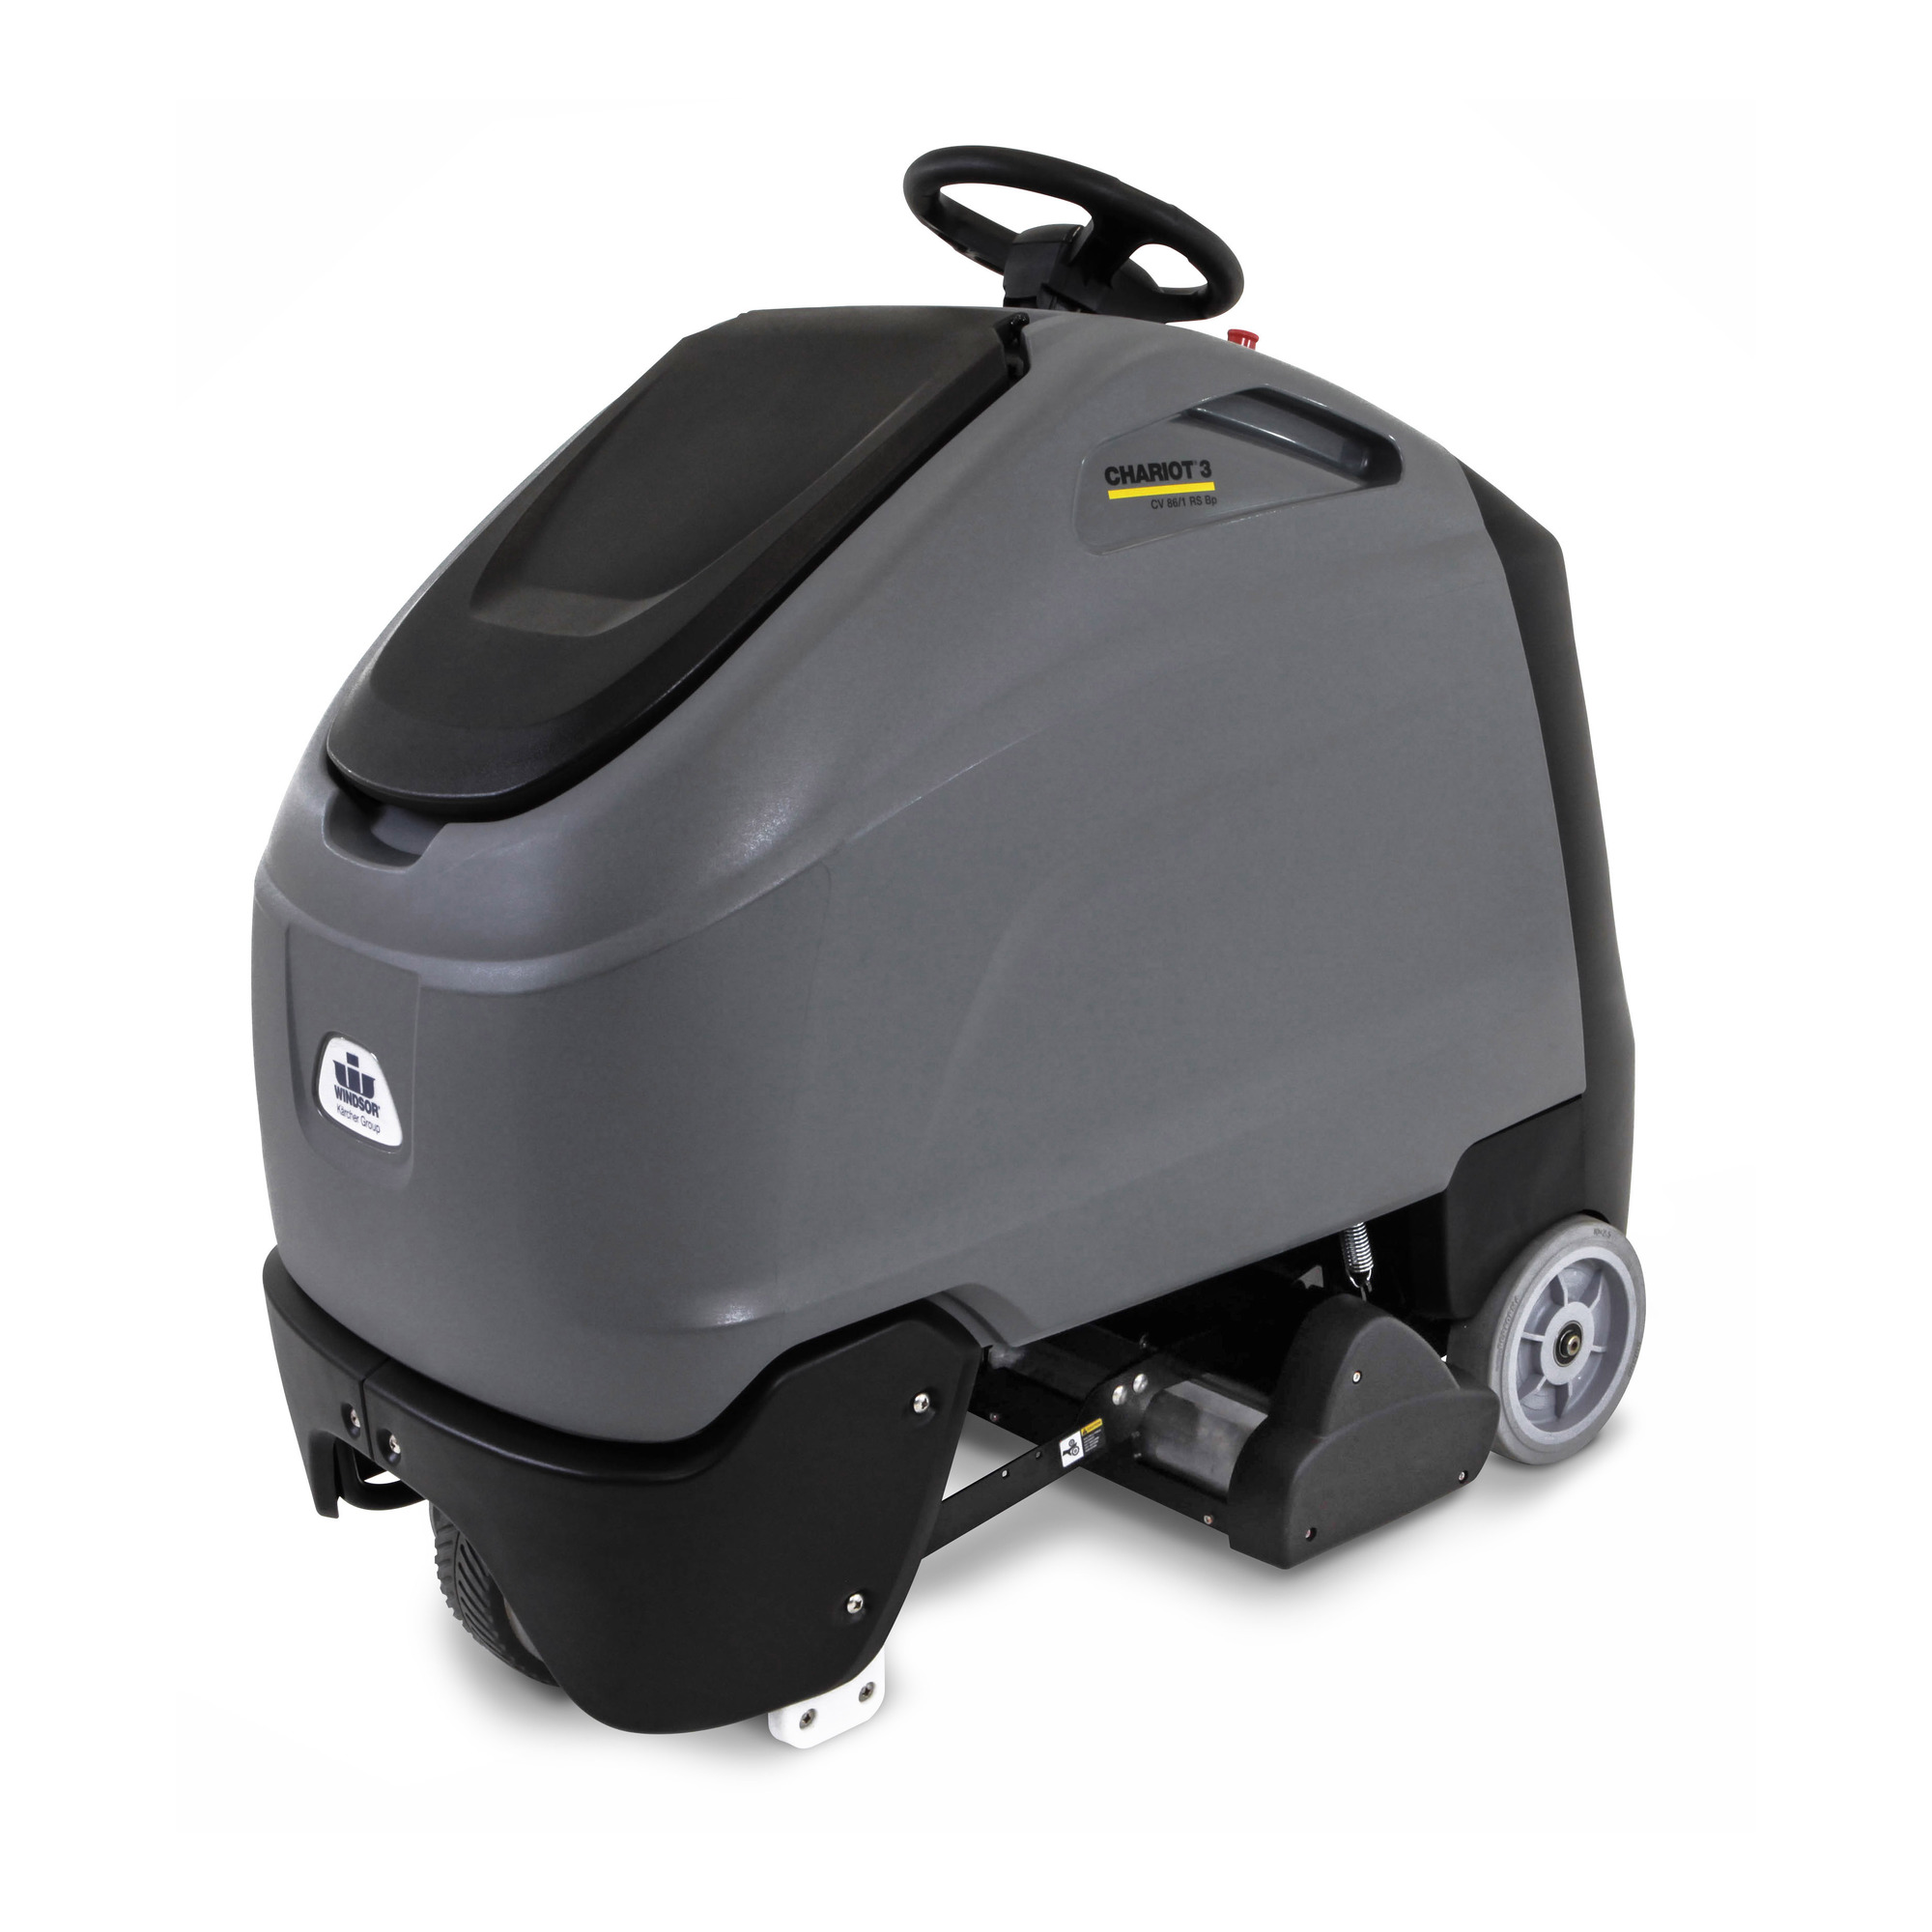 34&quot; CHARIOT 3 CV 86/1 STAND-ON 
VACUUM - 234AH BATTERIES - AGM 
MAINTENANCE FREE BATTERIES -  
SHELF CHARGER